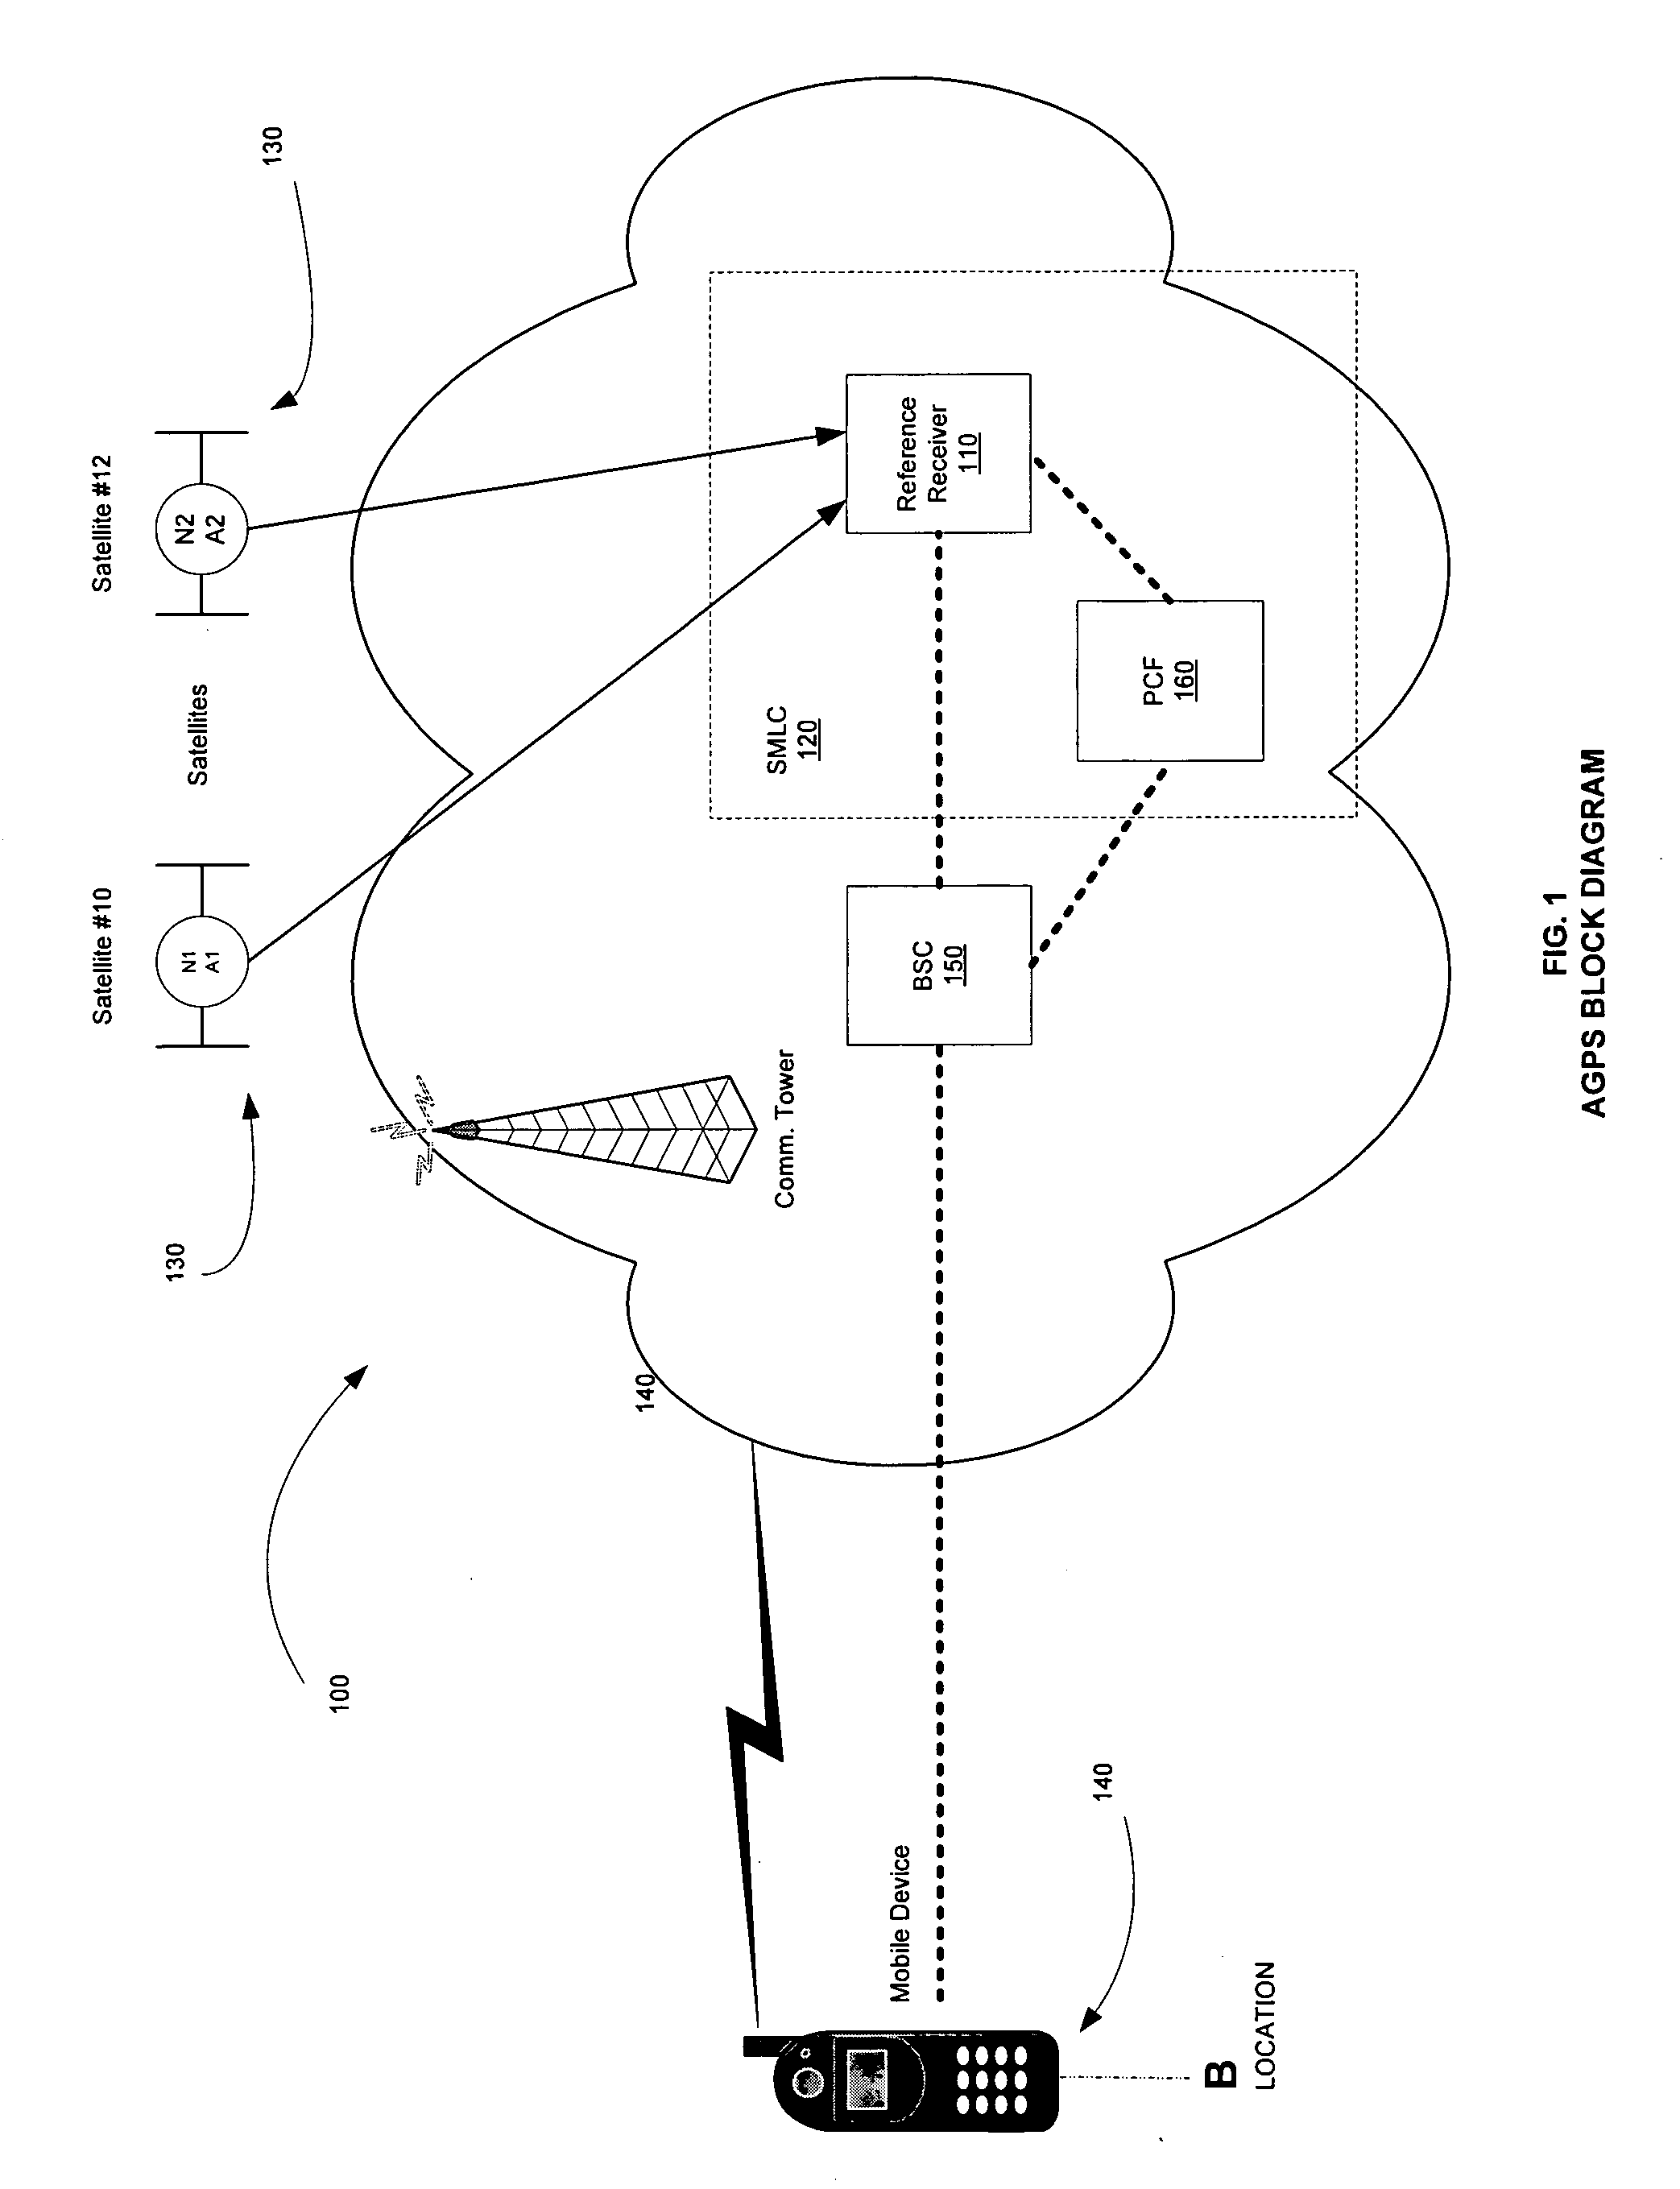 Method of compressing GPS assistance data to reduce the time for calculating a location of a mobile device